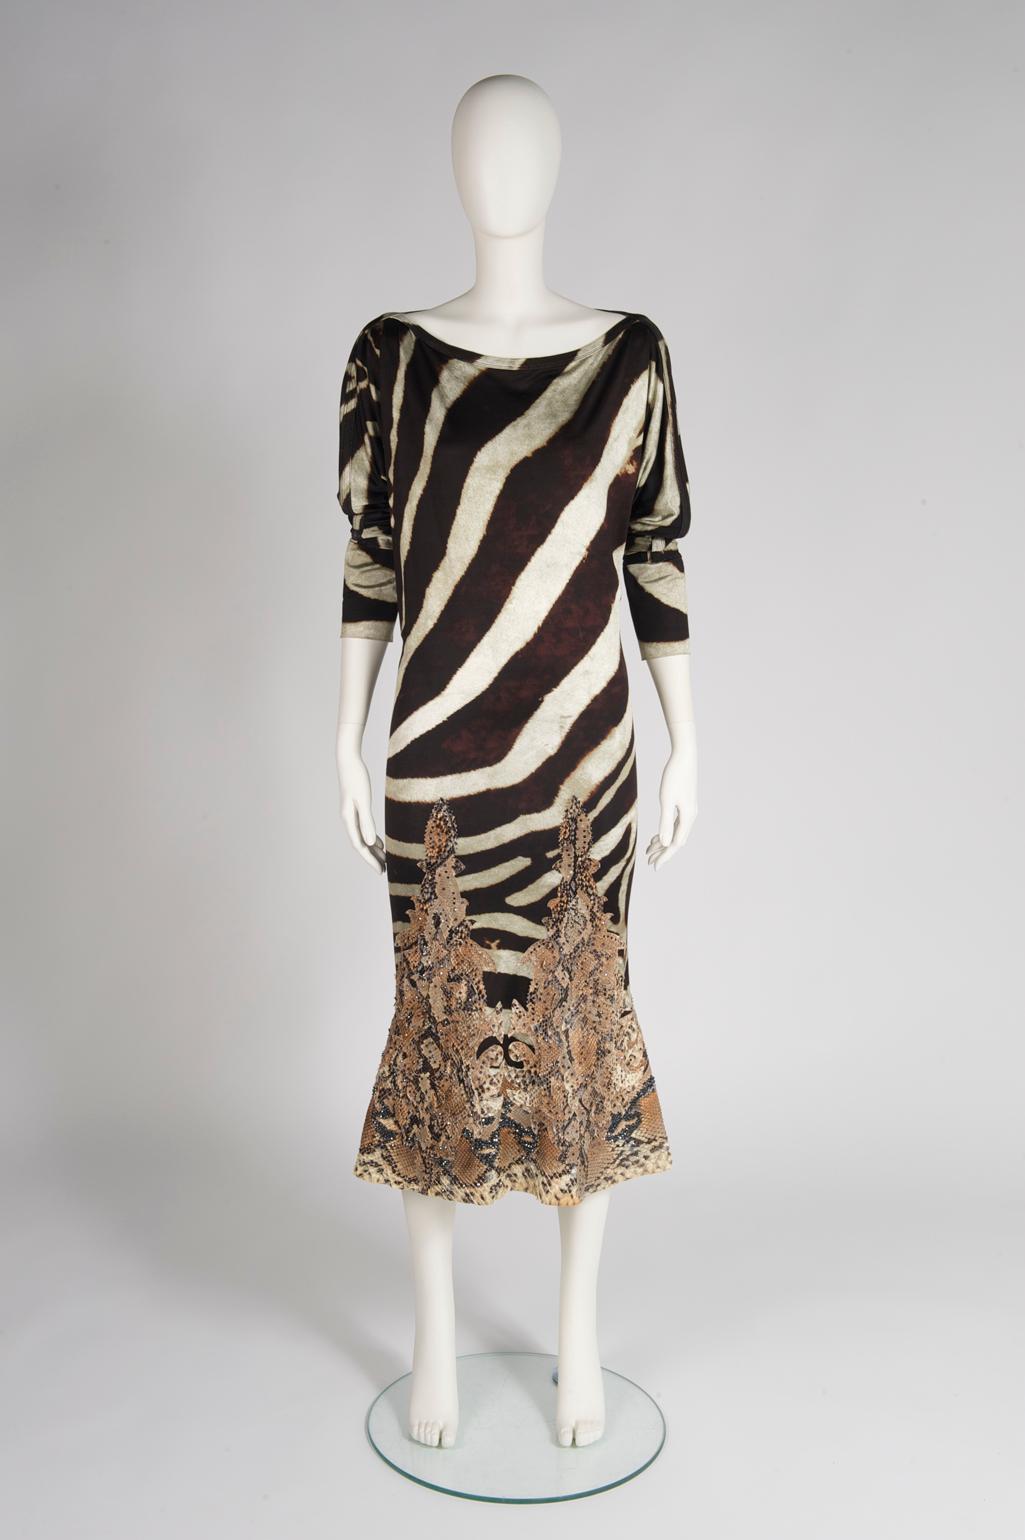 Made from stretch jersey and snakeskin, this 00's Ferré dress (look n° 78 from the SS2005 collection) is embellished with beads. Labeled an Italian size 42 (US 4-6), this piece runs true to size.

Fits approx. : US 4-8 / FR 38-40 

This item has